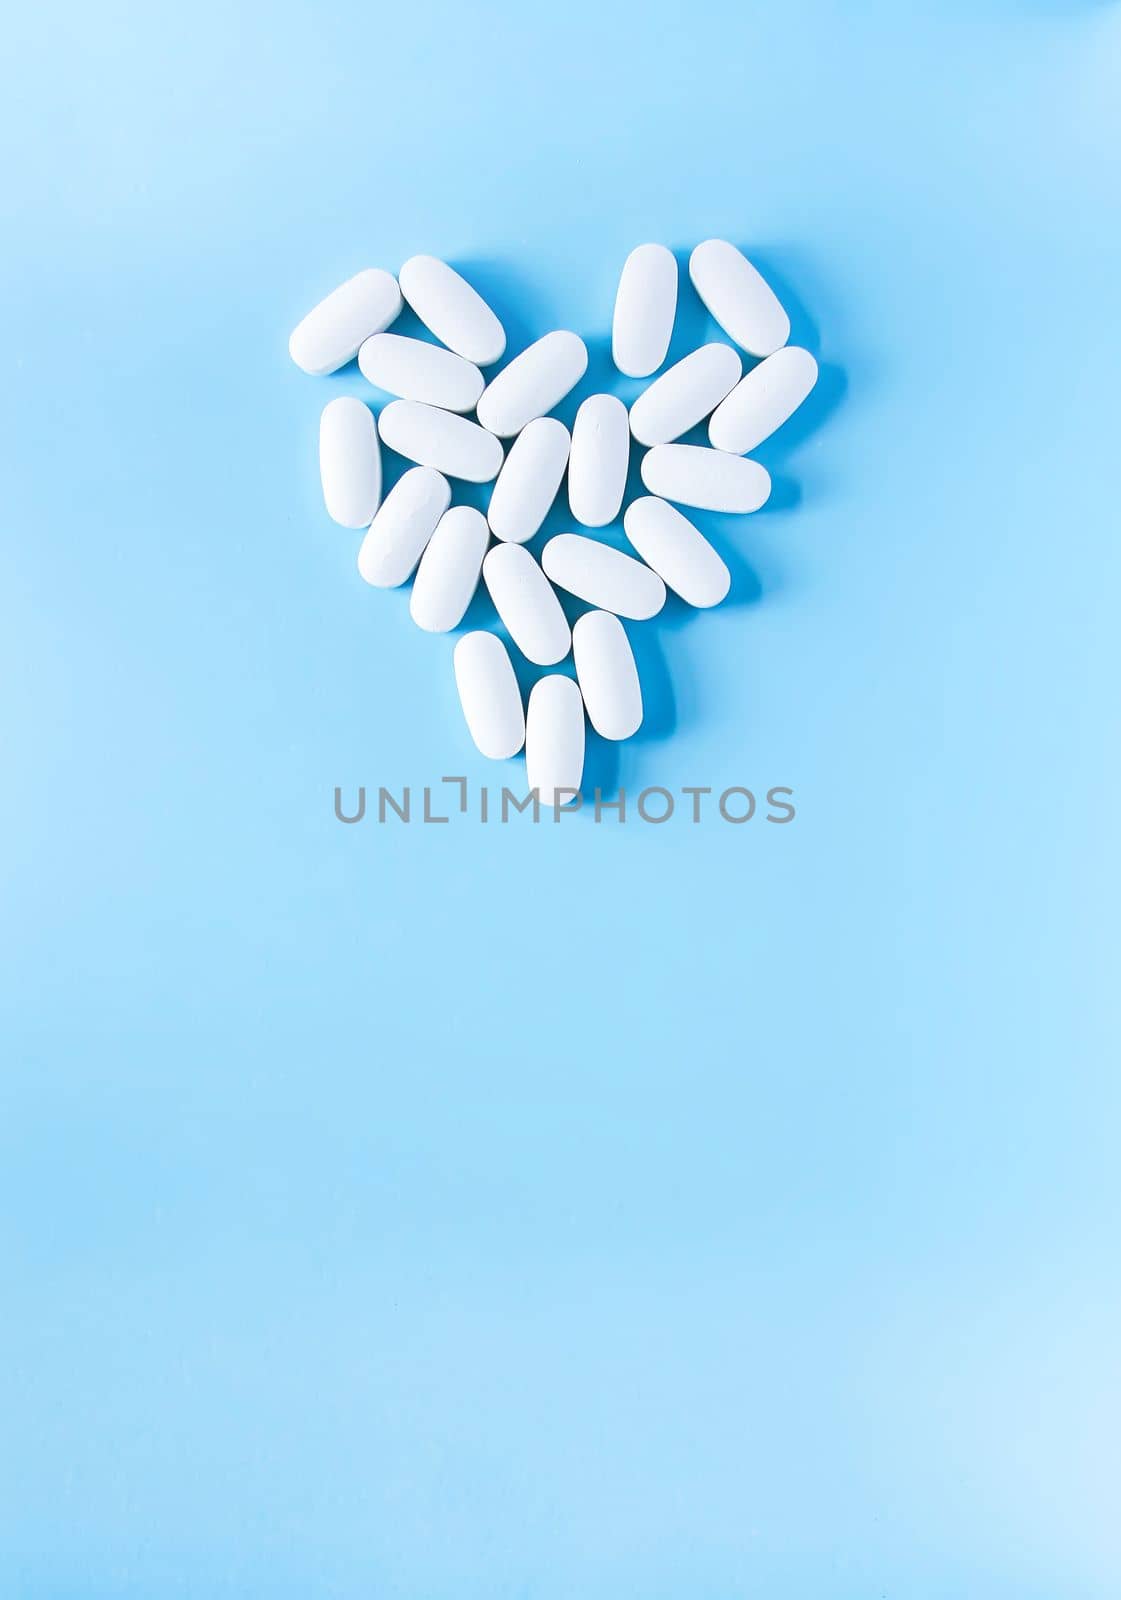 Pills of vitamin in the shape of heart on soft blue background. by nightlyviolet